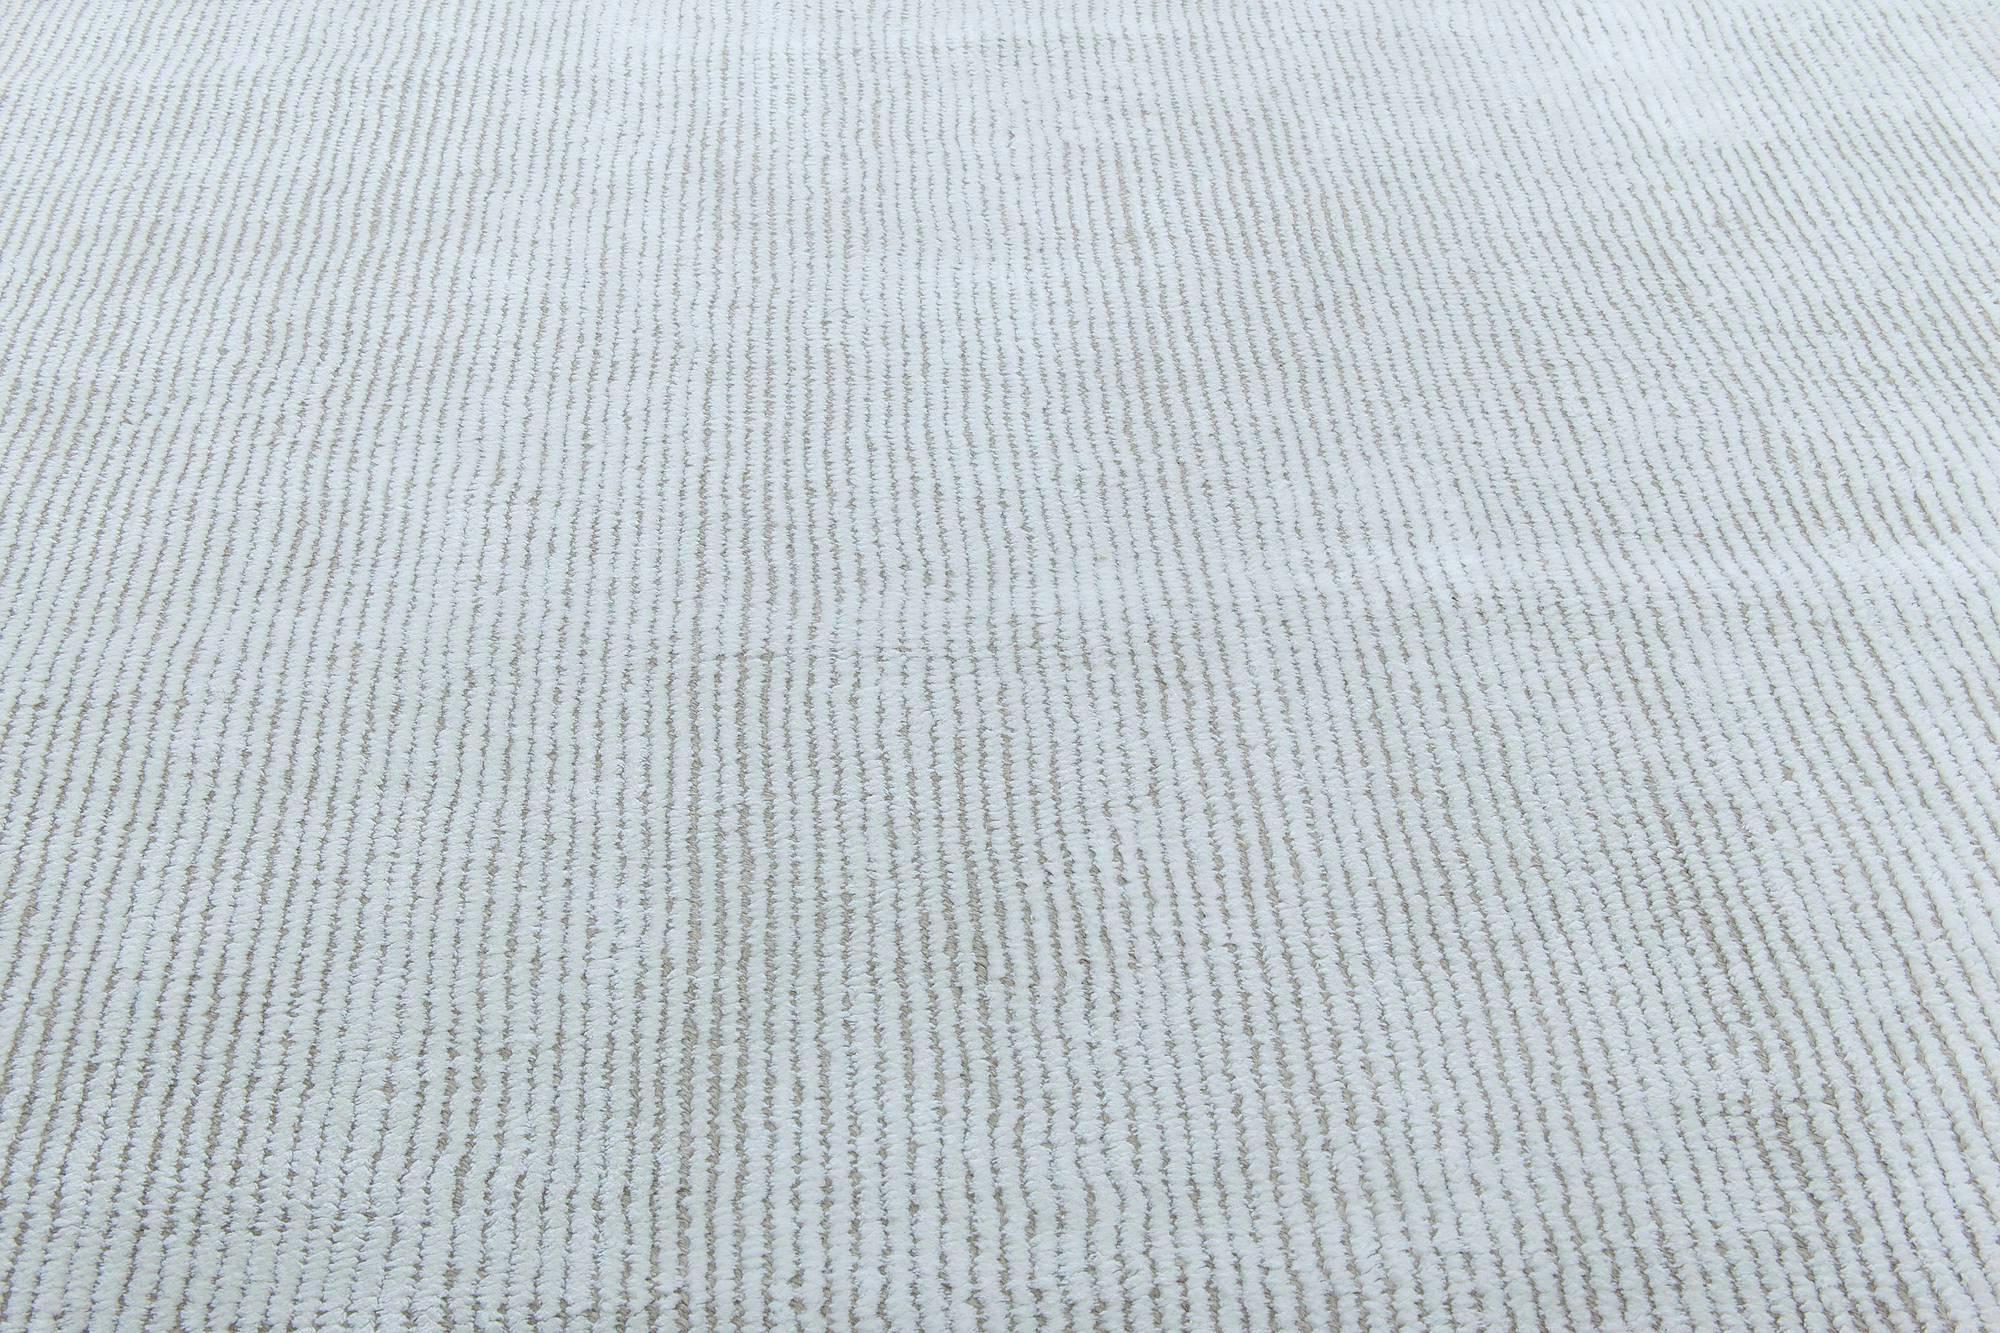 Hand-Knotted Contemporary Solid White, Beige and Grey Handmade Wool Rug by Doris Leslie Blau For Sale